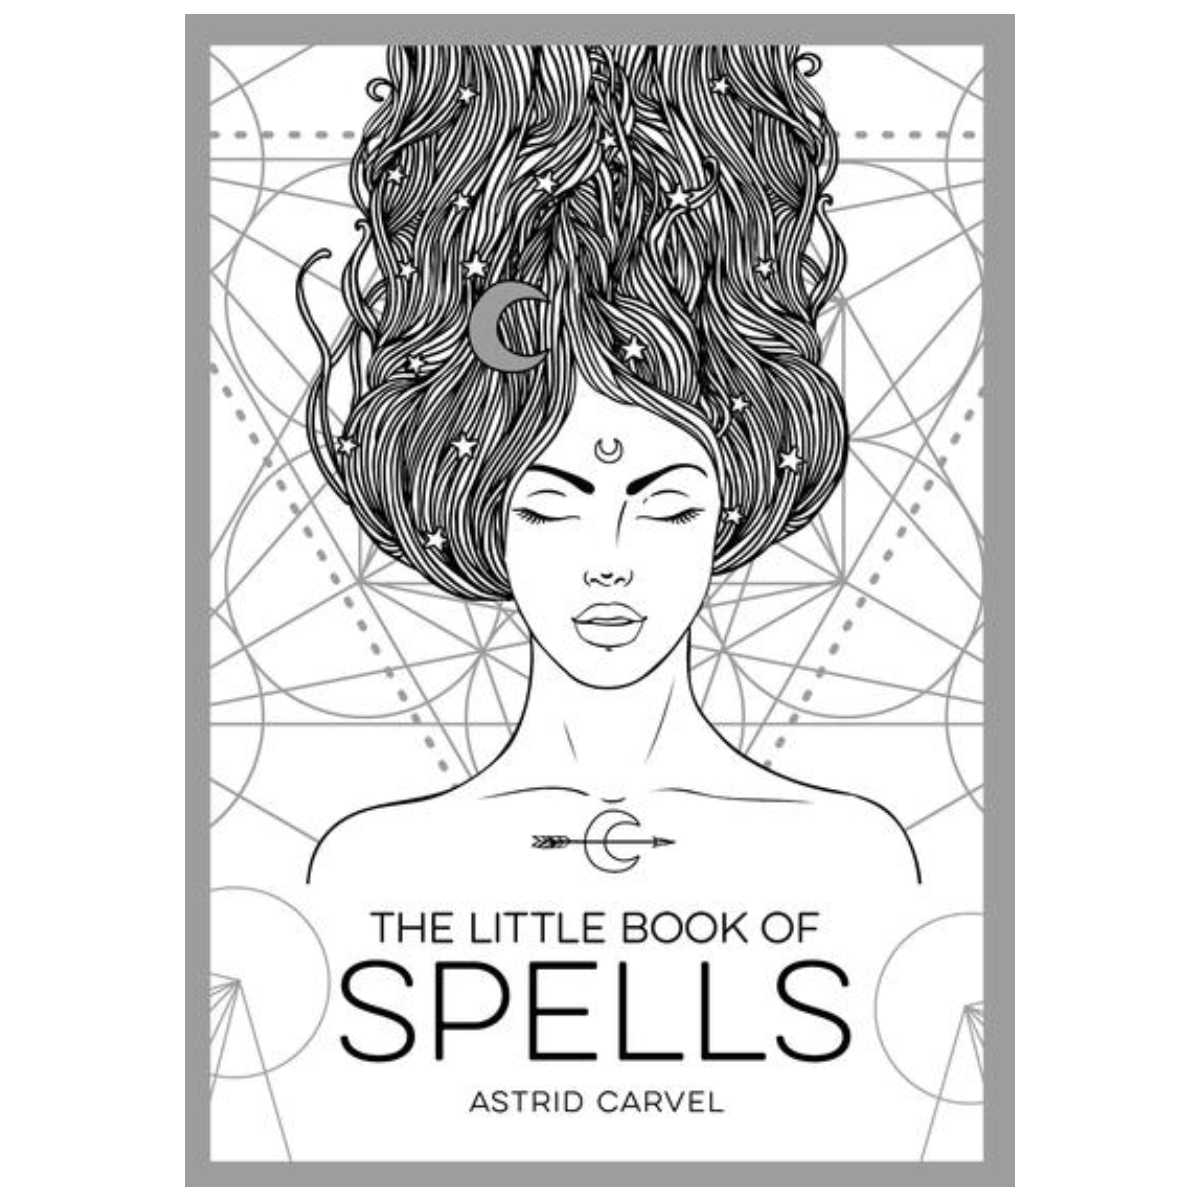 The Little Book of Spells : An Introduction to White Witchcraft by Astrid Carvel